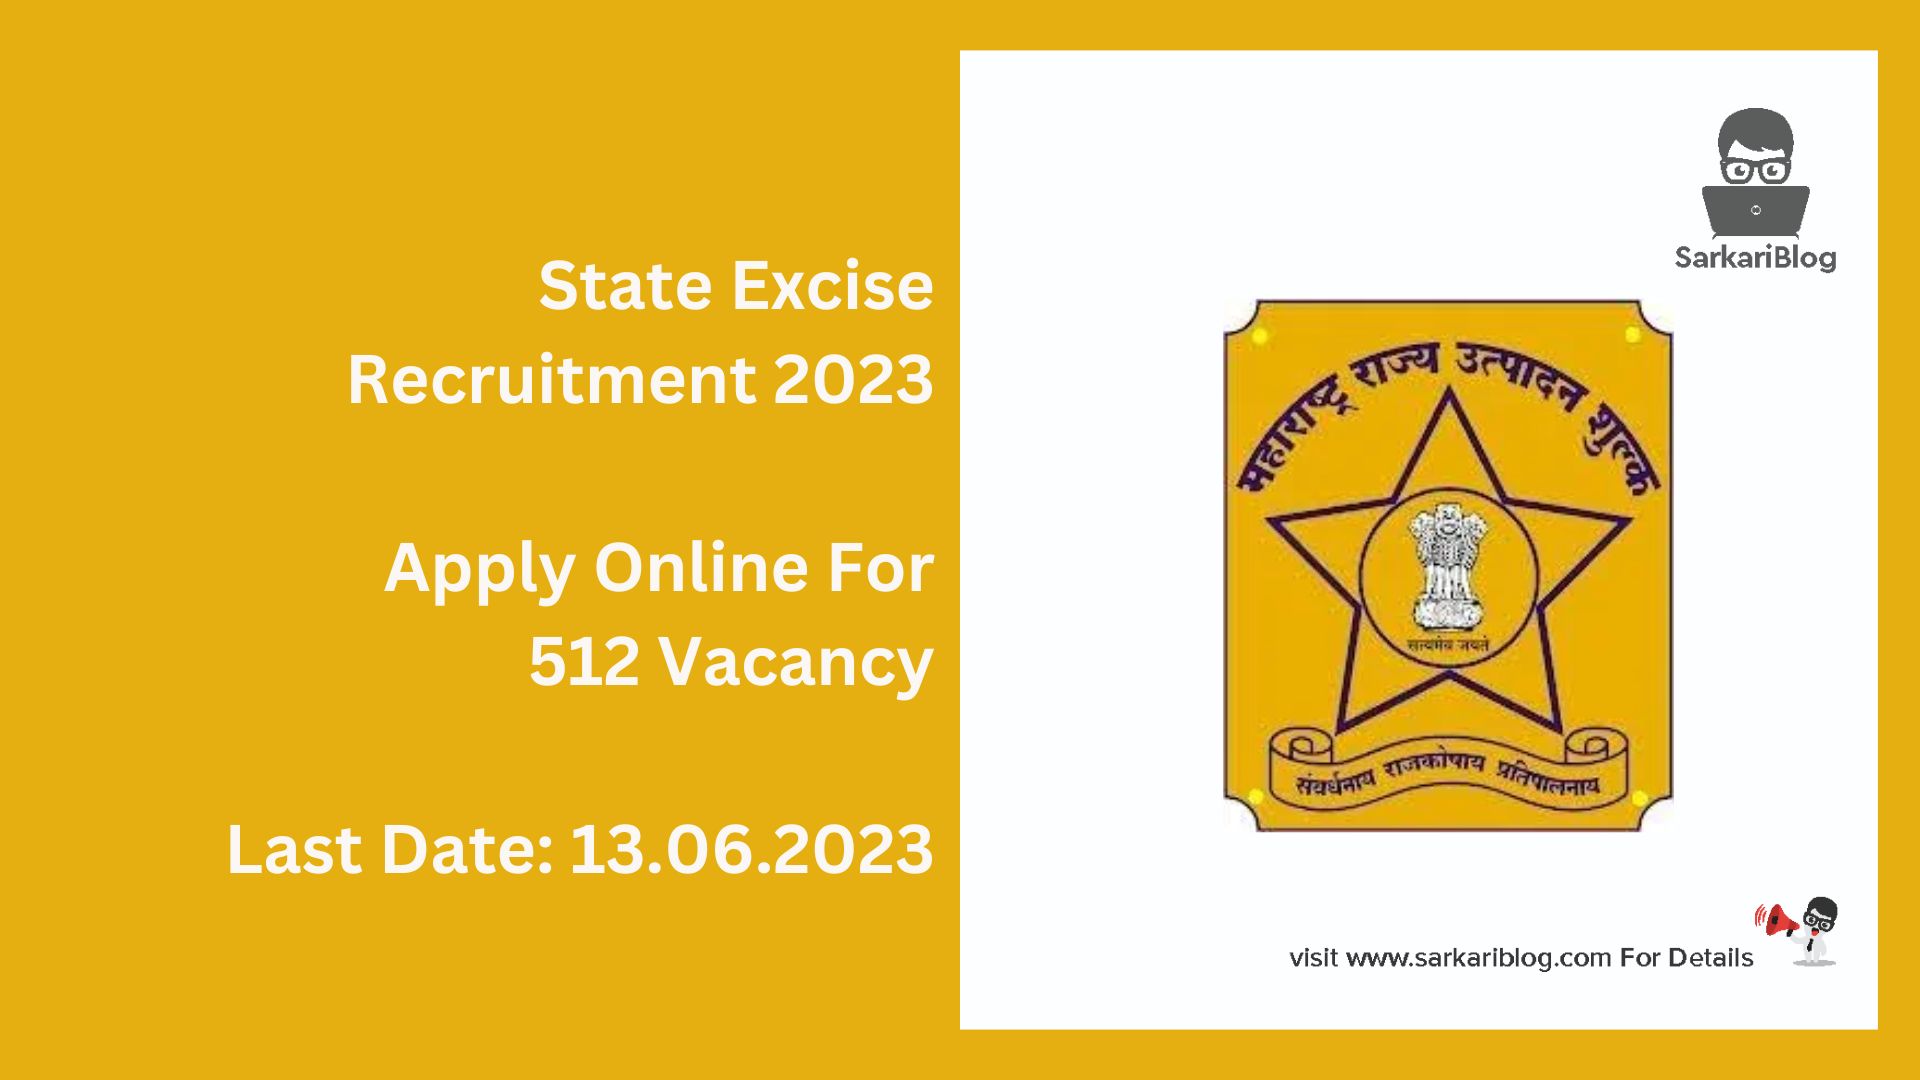 State Excise Recruitment 2023